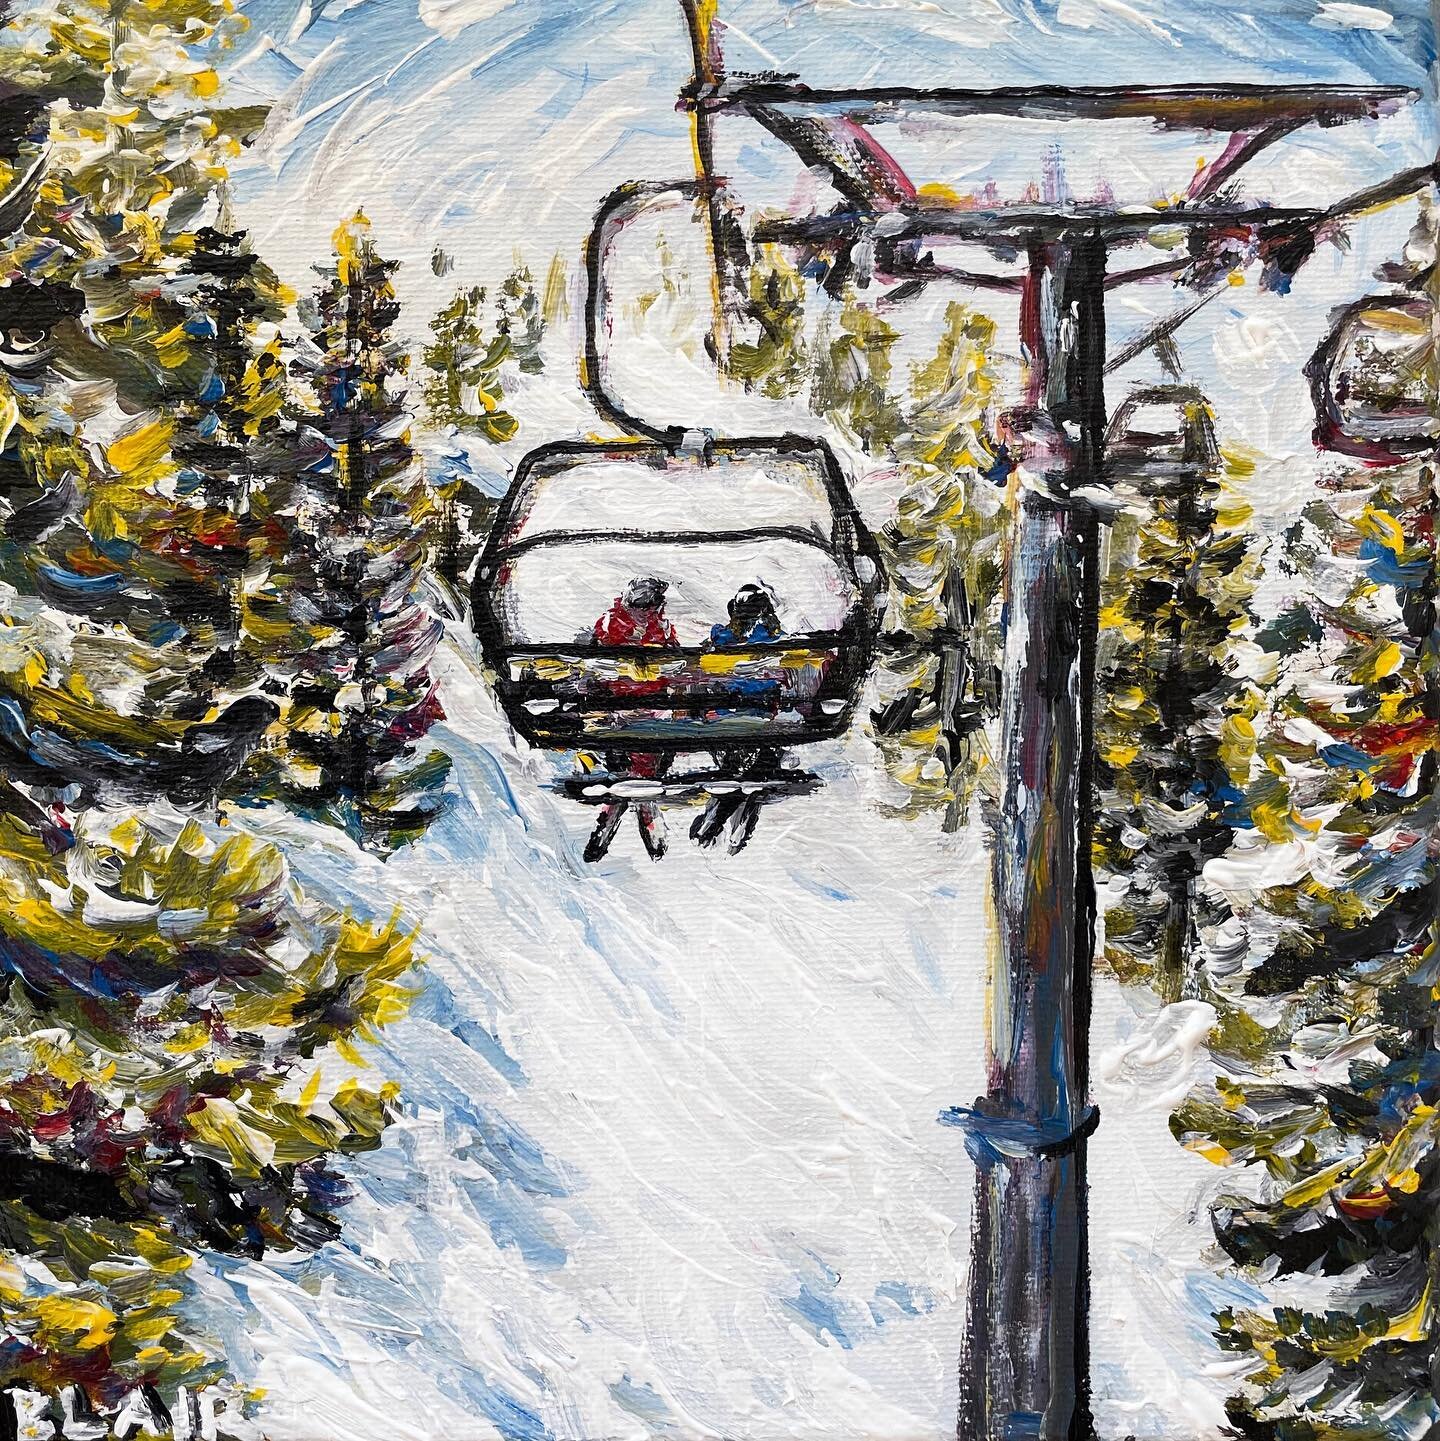 Cuteness!! ❤️💙

8x8 inch commissioned acrylic painting for Megan. It&rsquo;s her and her godfather. She&rsquo;s giving it to him as a thank-you gift. It&rsquo;s based off of the Granite Chief lift at palisades, which is his favorite.